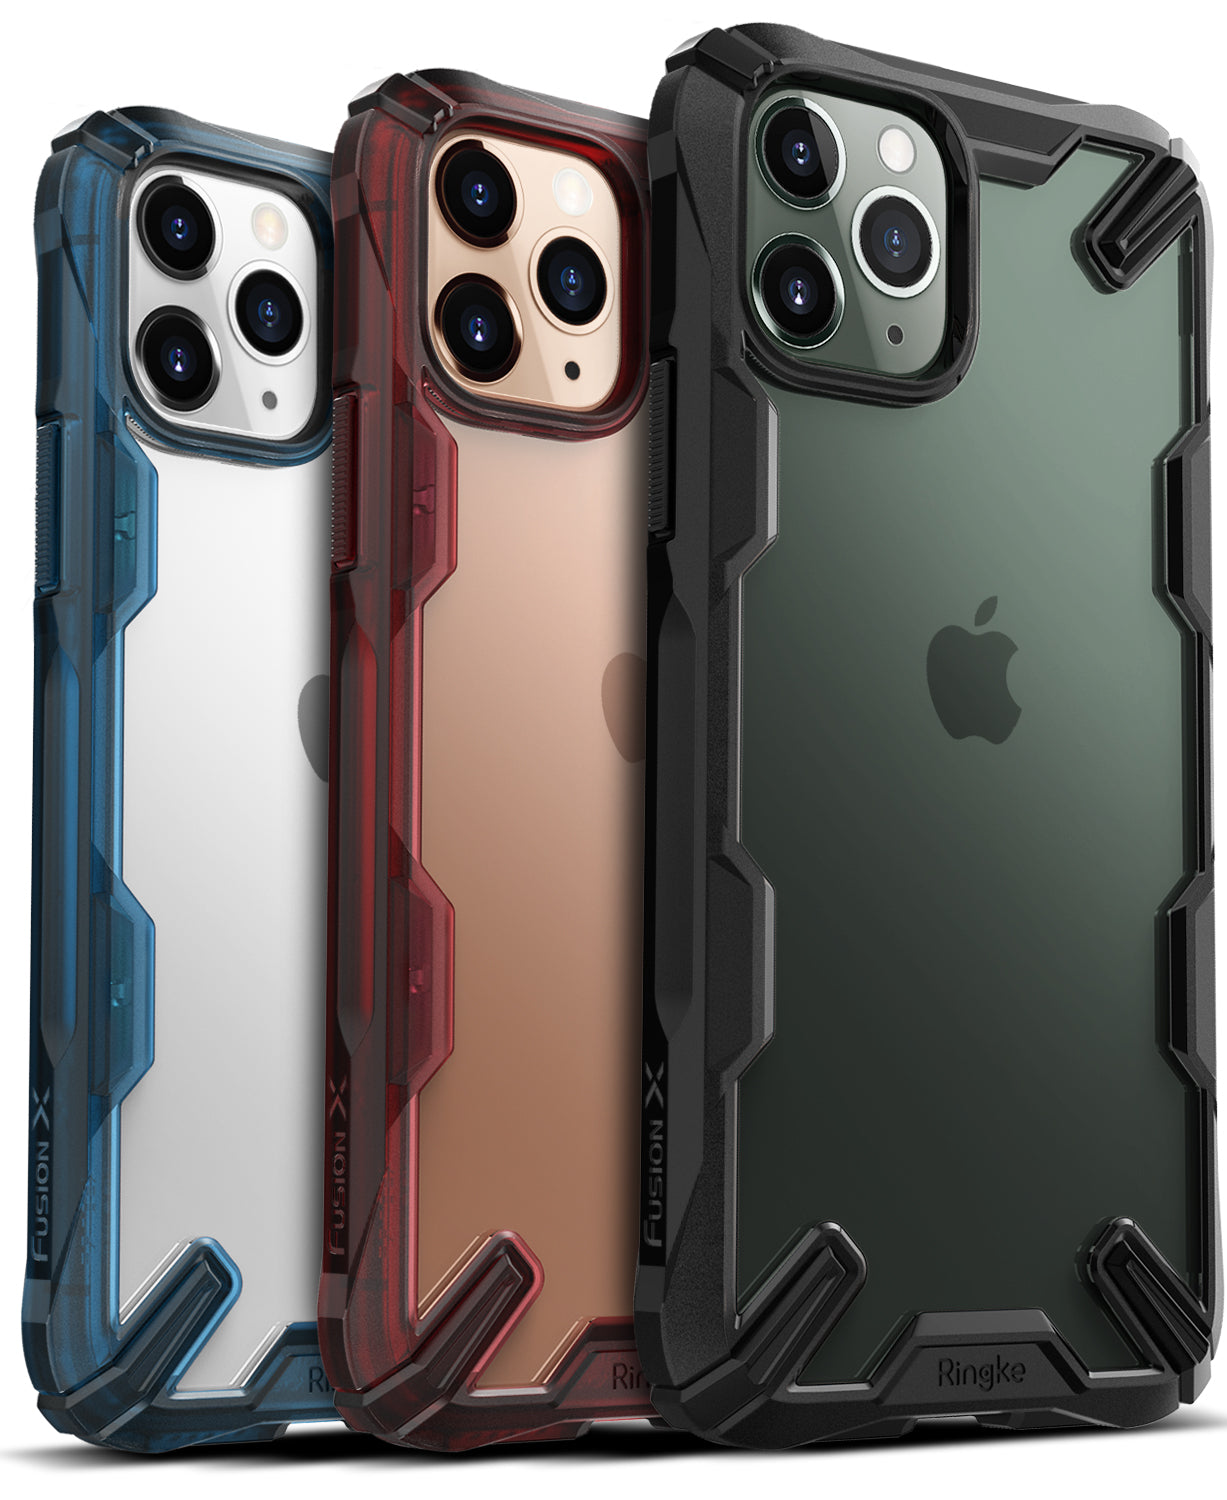 ringke fusion-x case designed for apple iphone 11 pro